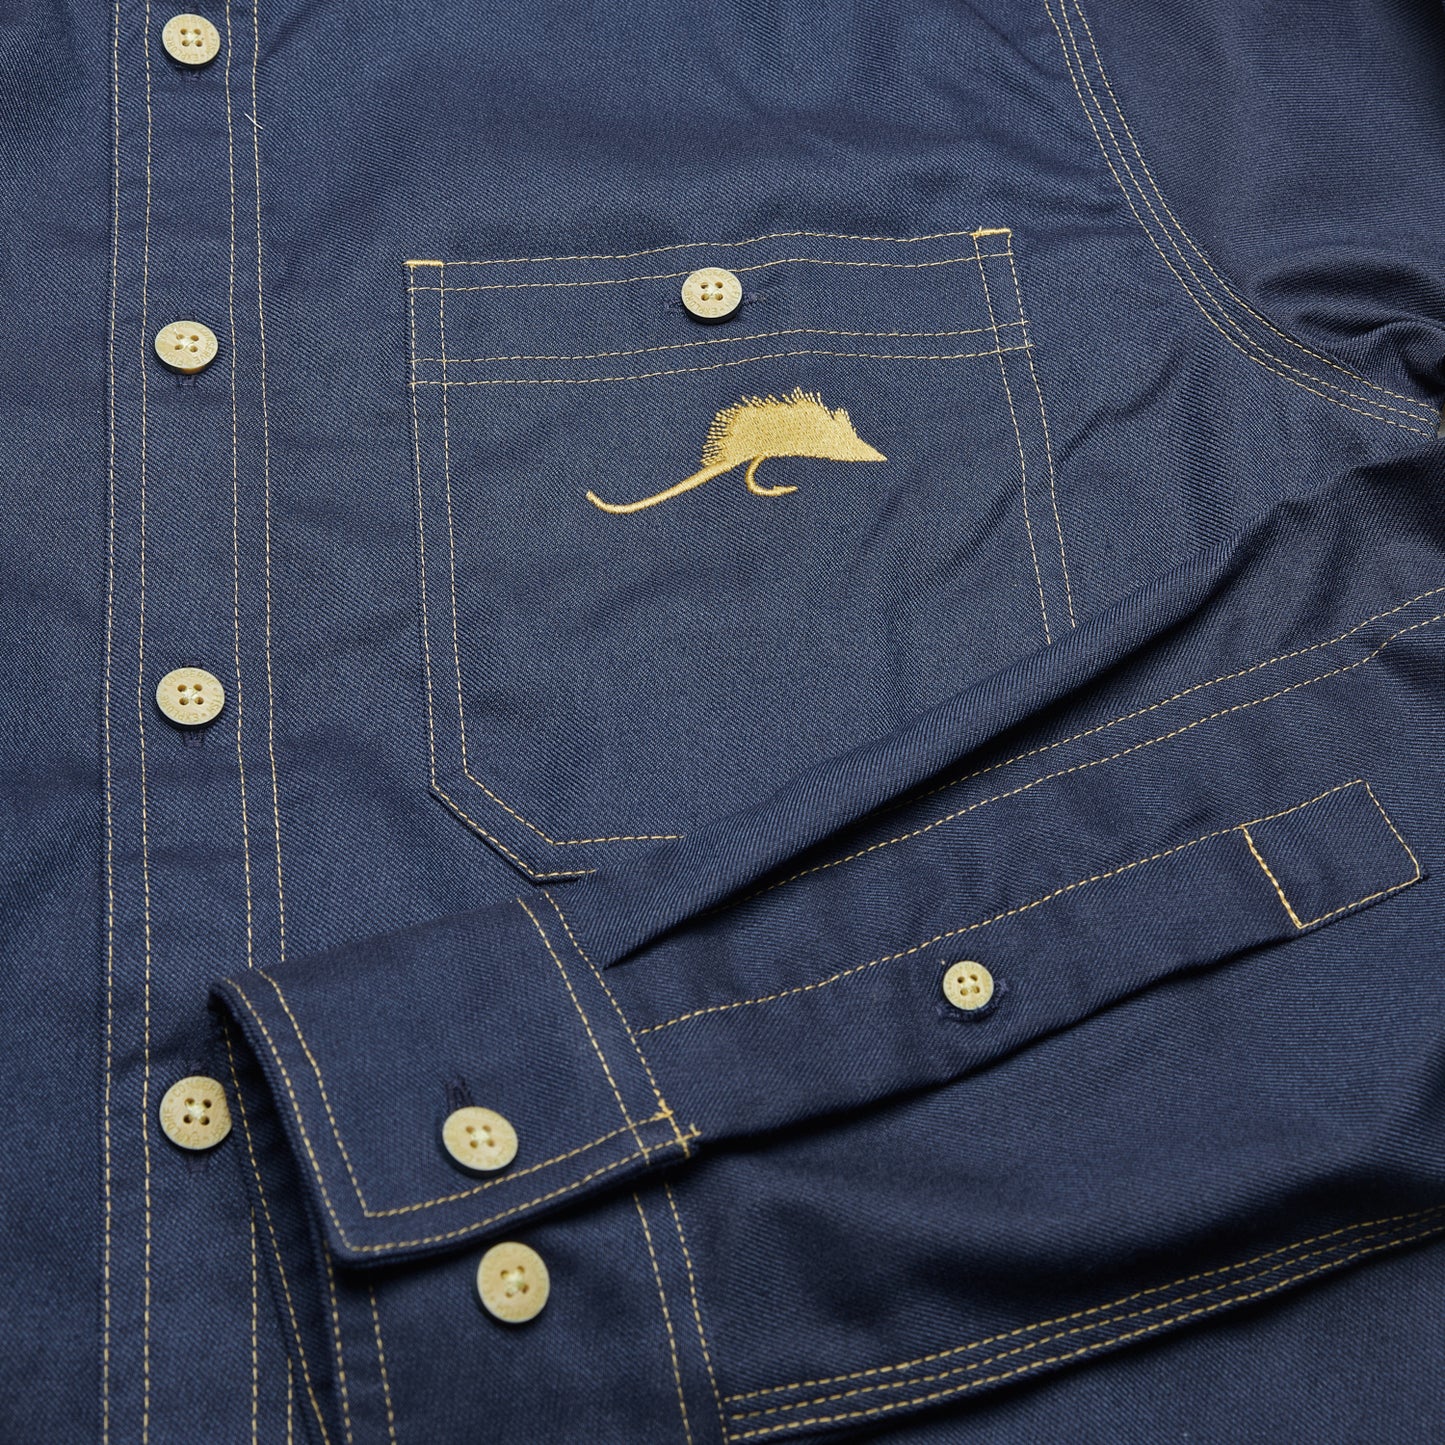 Detail photo of the front pocket and cuff/sleeve of a navy blue shirt with a fly embroidered on the pocket.